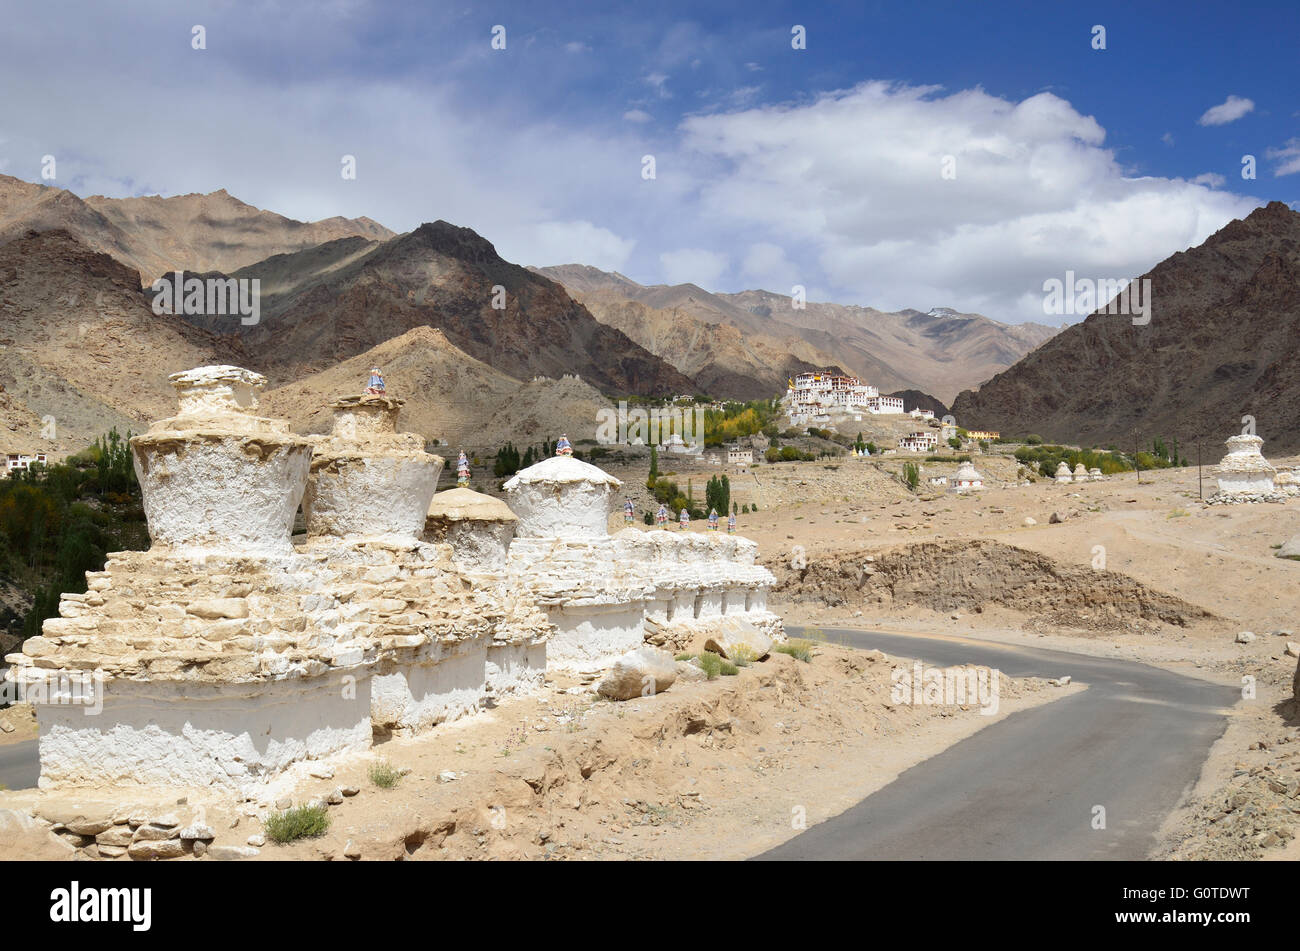 Buddhist Chortens in the foreground and Likir Monastery in the background, situated in a typical Ladakh landscape, near Leh, Ind Stock Photo